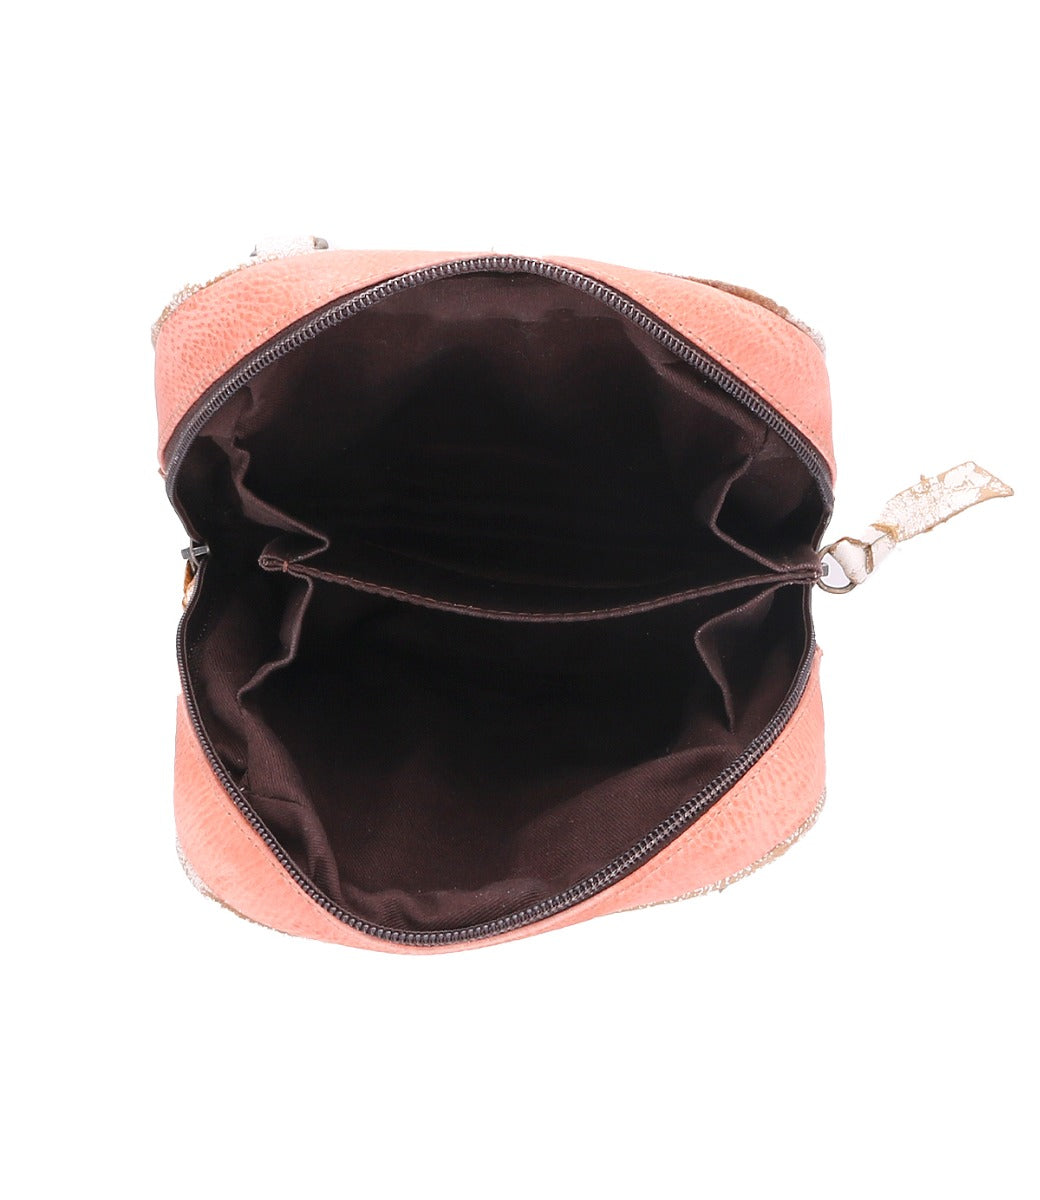 The inside of a Capture pink purse with a zipper by Bed Stu.